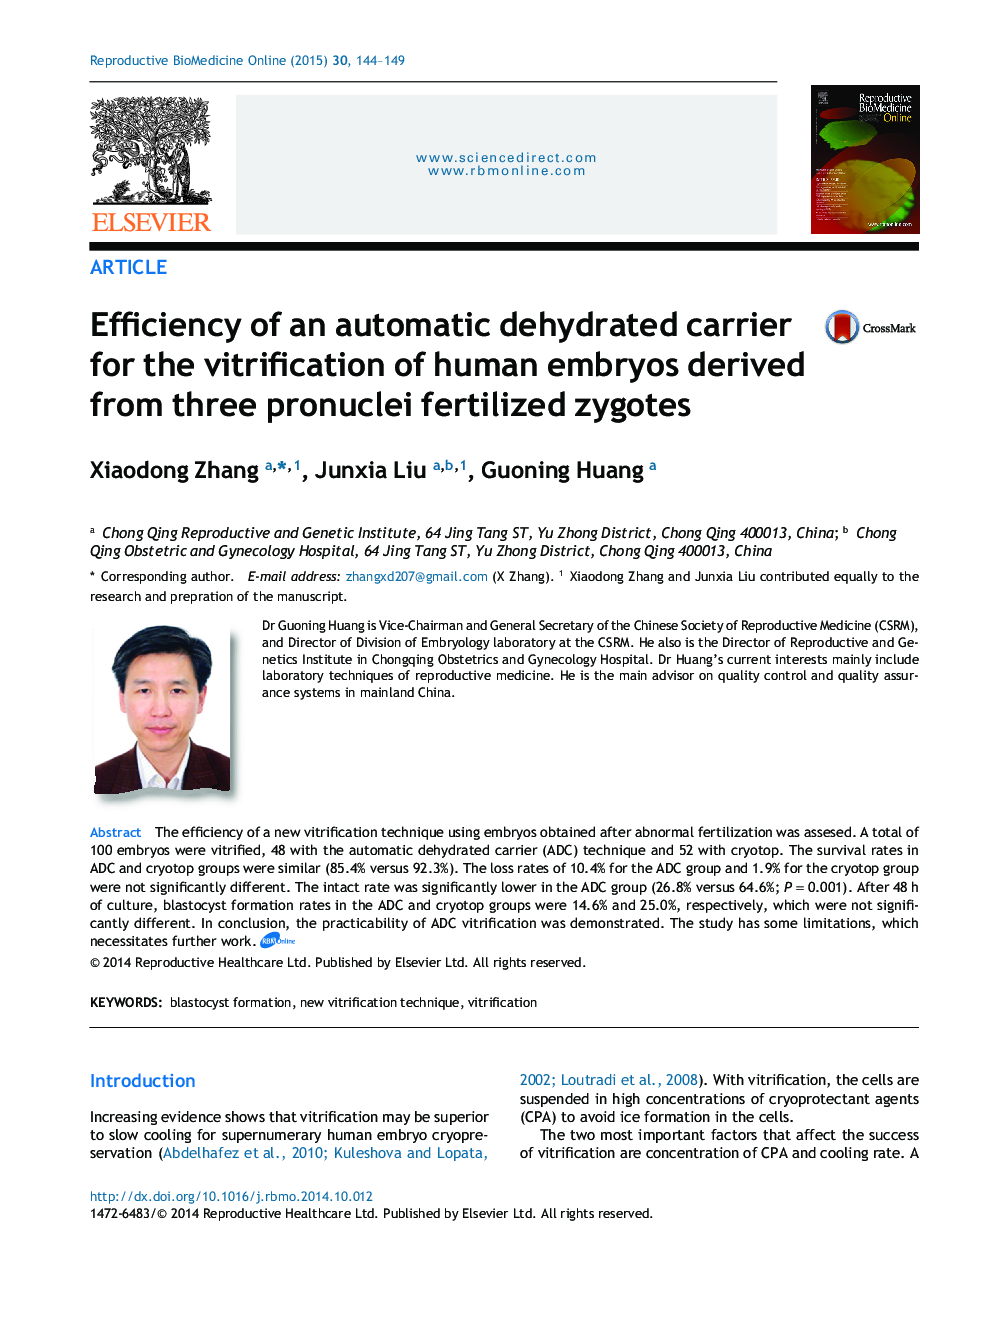 Efficiency of an automatic dehydrated carrier for the vitrification of human embryos derived from three pronuclei fertilized zygotes